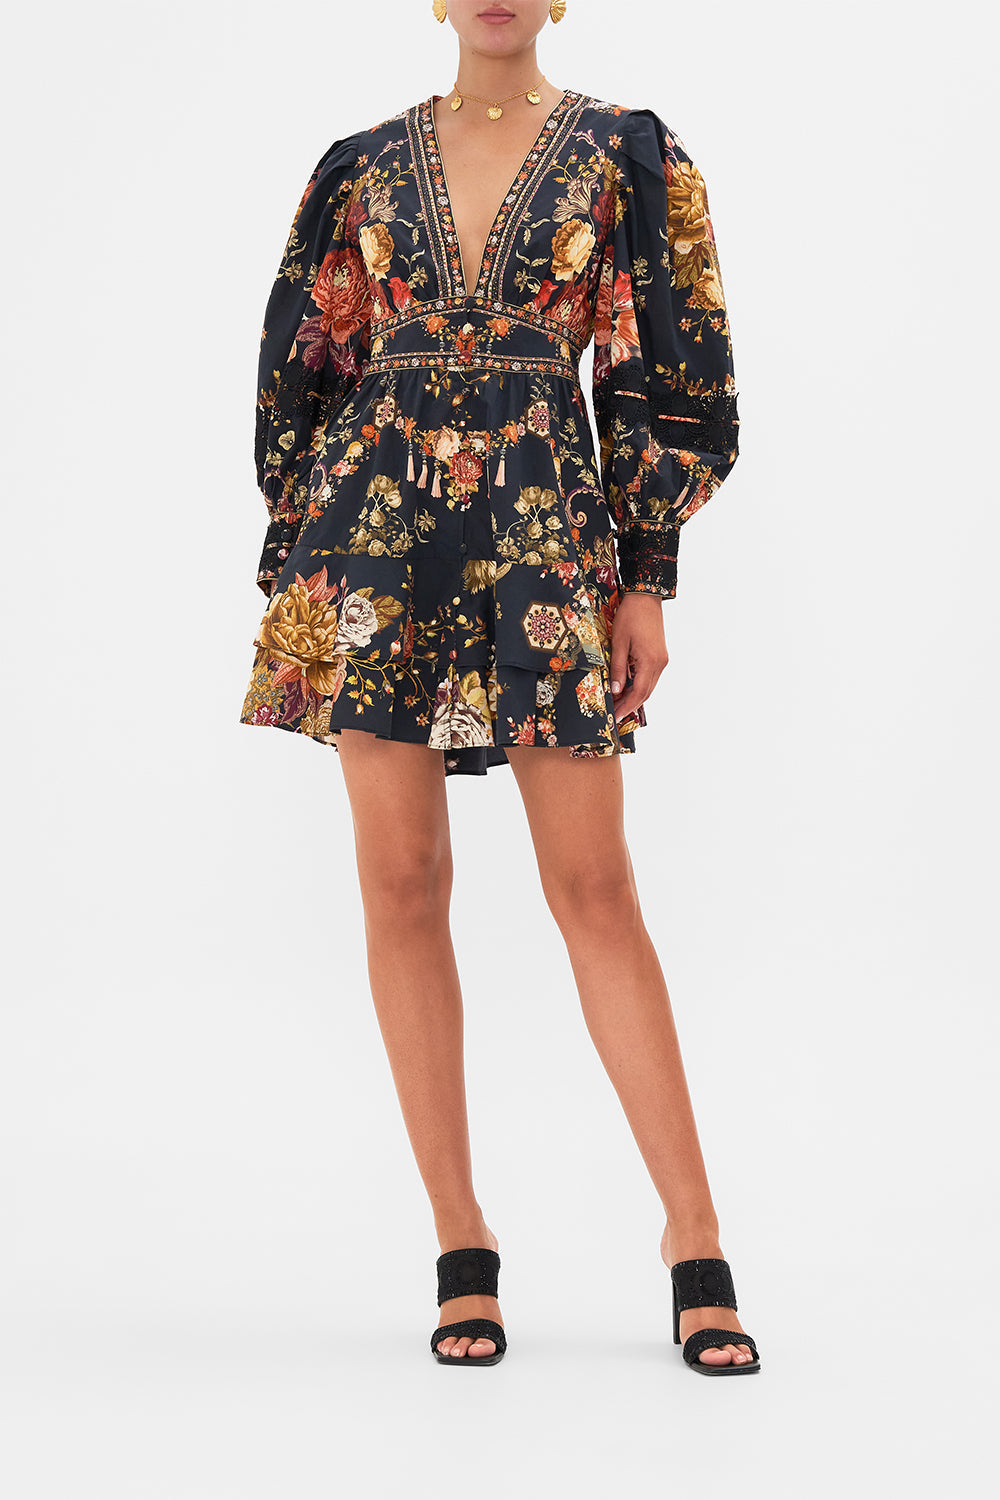 CAMILLA Floral Button Front Frill Dress with Lace Detail in Stitched in Time